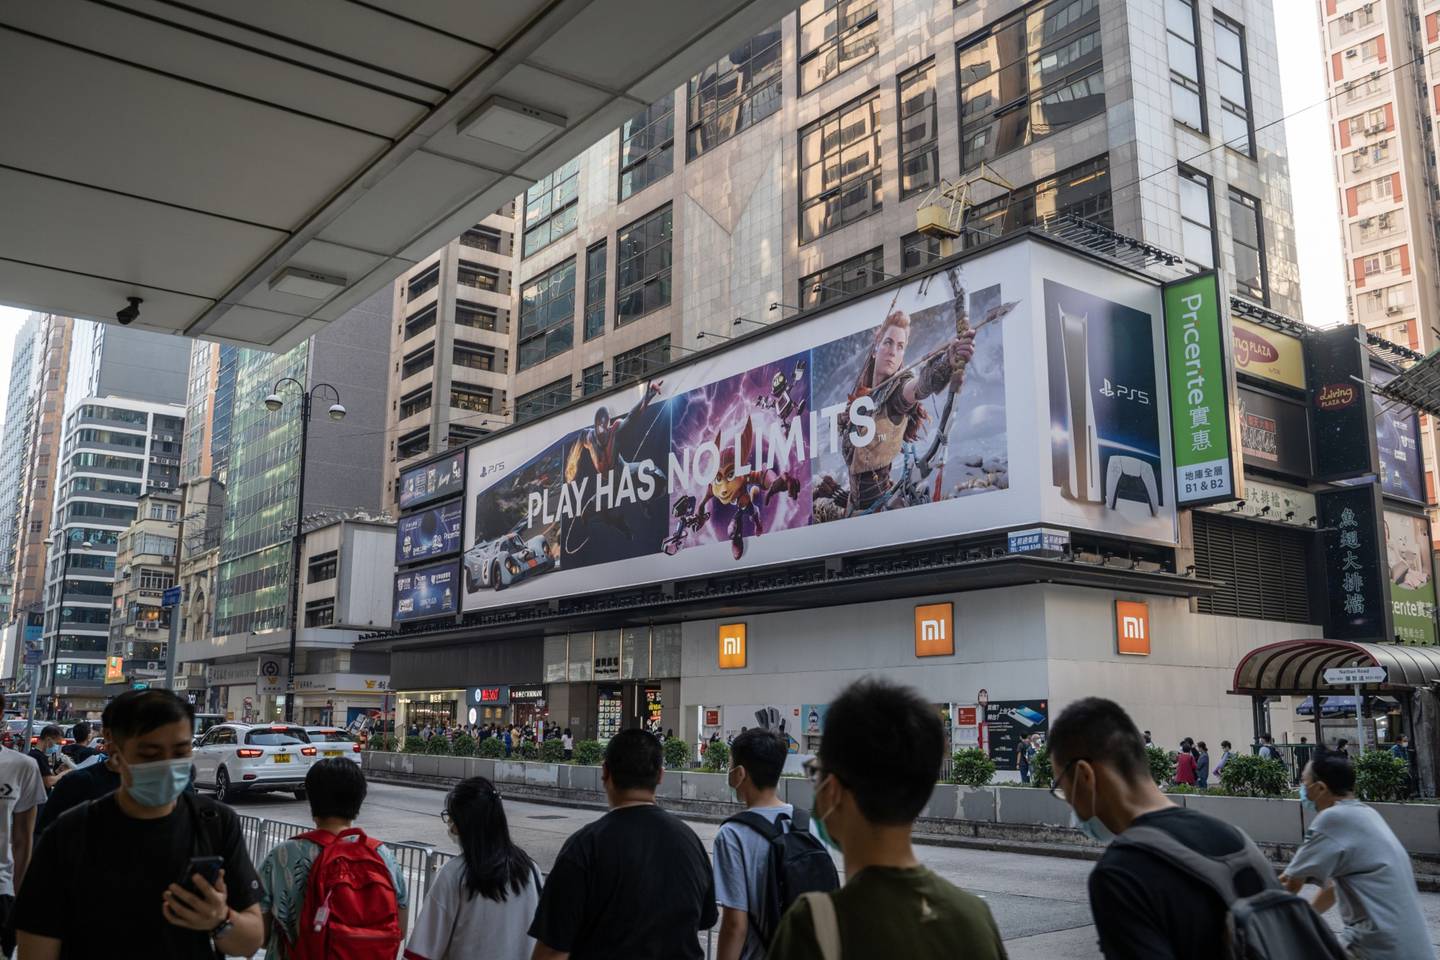 Pedestrians wearing protective mask walk past a billboard advertising the Sony Corp. PlayStation 5 game console in Hong Kong, China, on Thursday, Nov. 26, 2020. The newest video-game console from Sony Corp., alongside rival Microsoft Corp.'s updated Xbox, are arguably the hottest items this Black Friday as shoppers line up in person or swarm retailers' websites hoping to snag one. Photographer: Roy Liu/Bloomberg